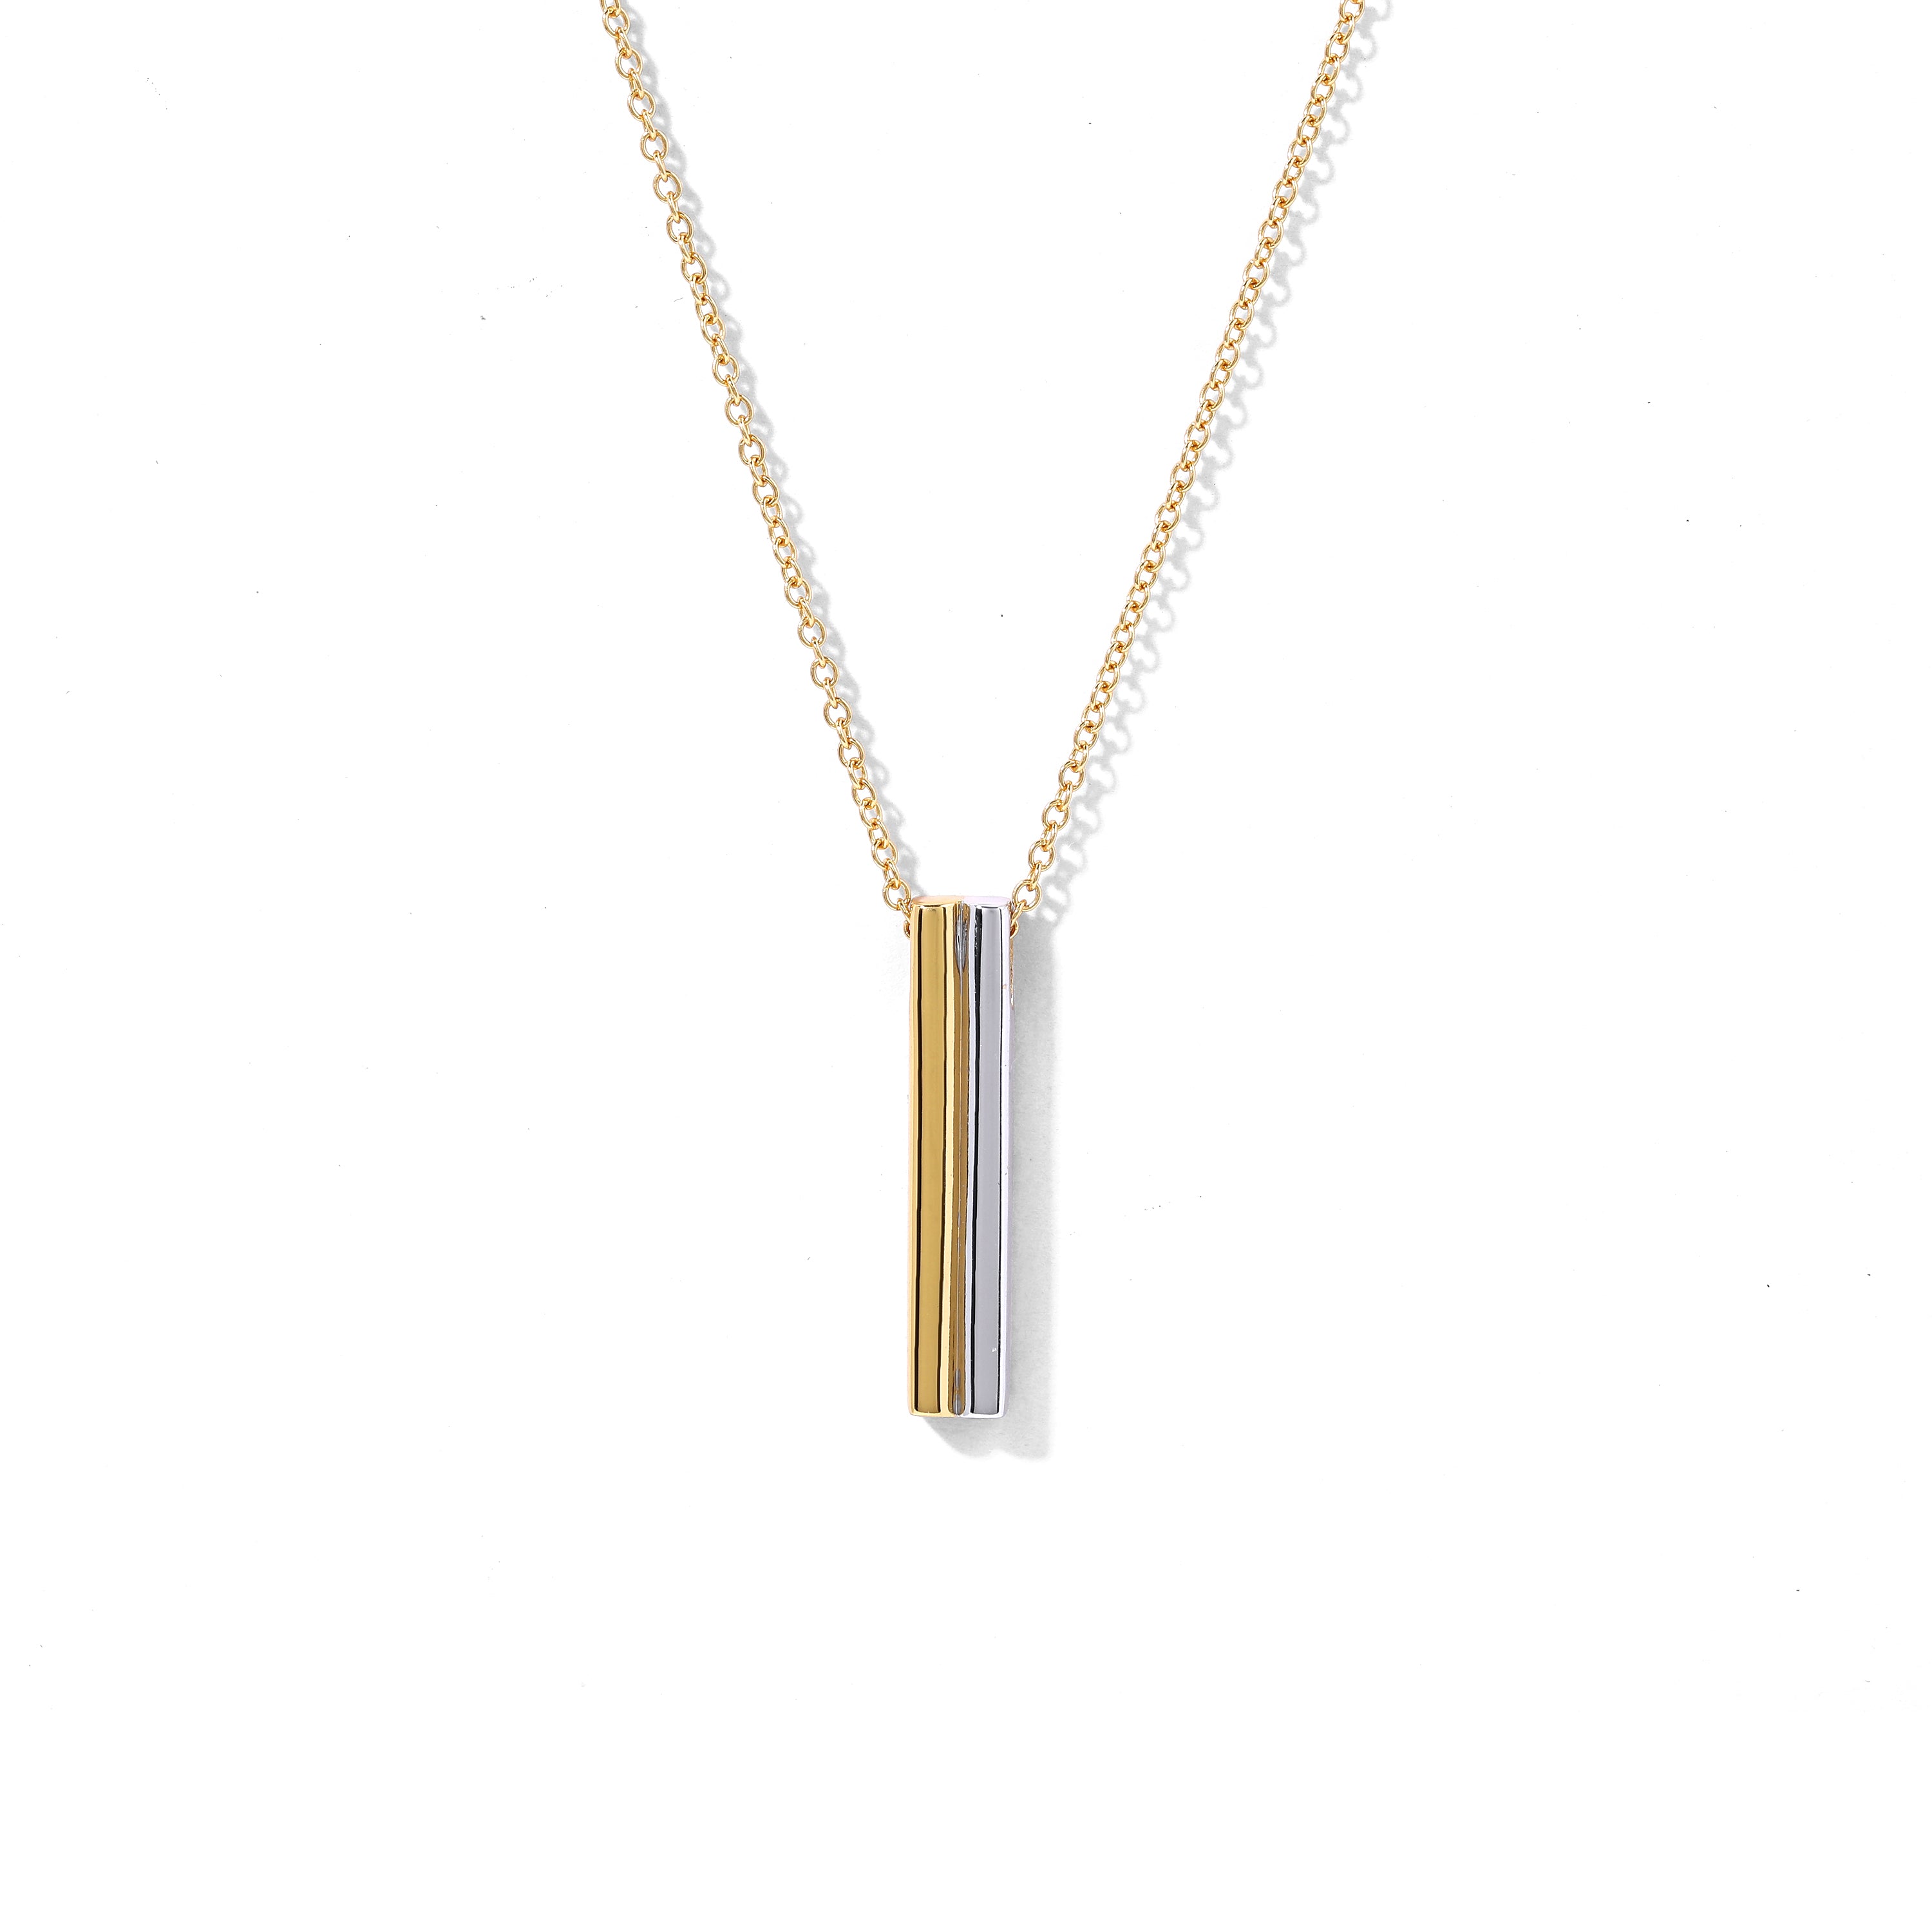 Elegant and minimalist necklace. 925 silver and gold bar pendant necklace.